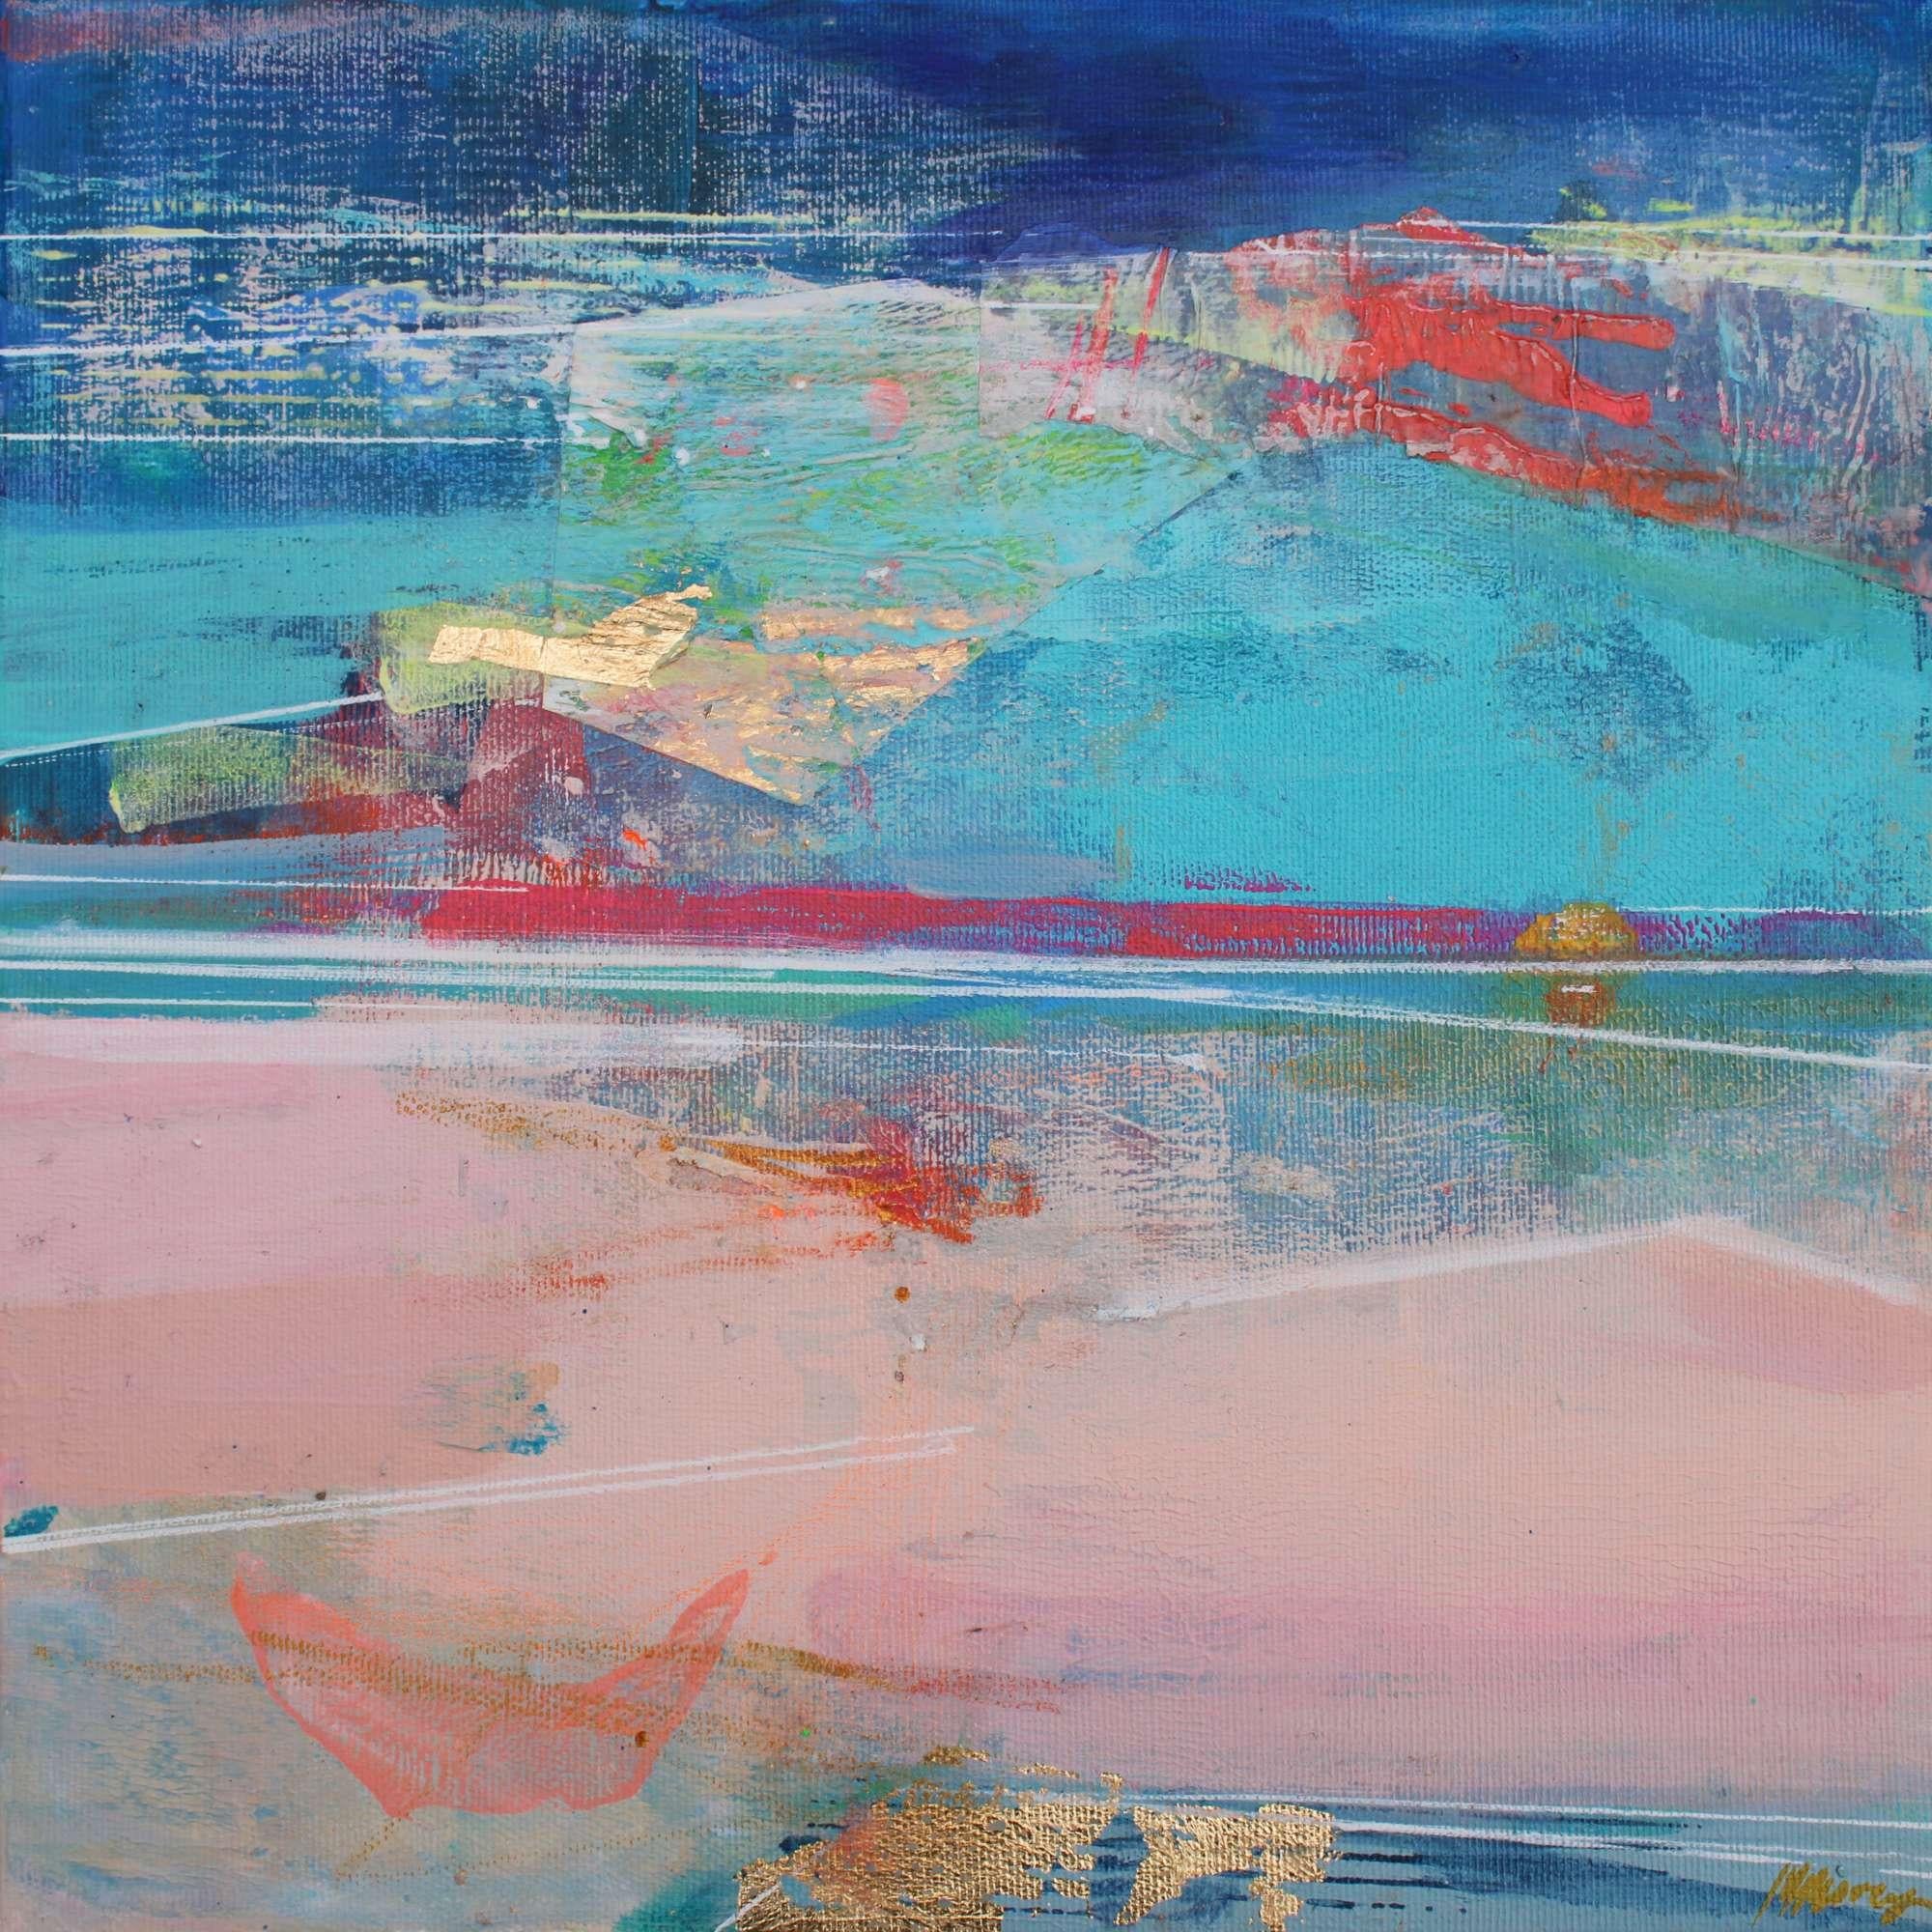 Something to Look Forward 2-original abstract contemporary landscape painting - Painting by Magdalena Morey